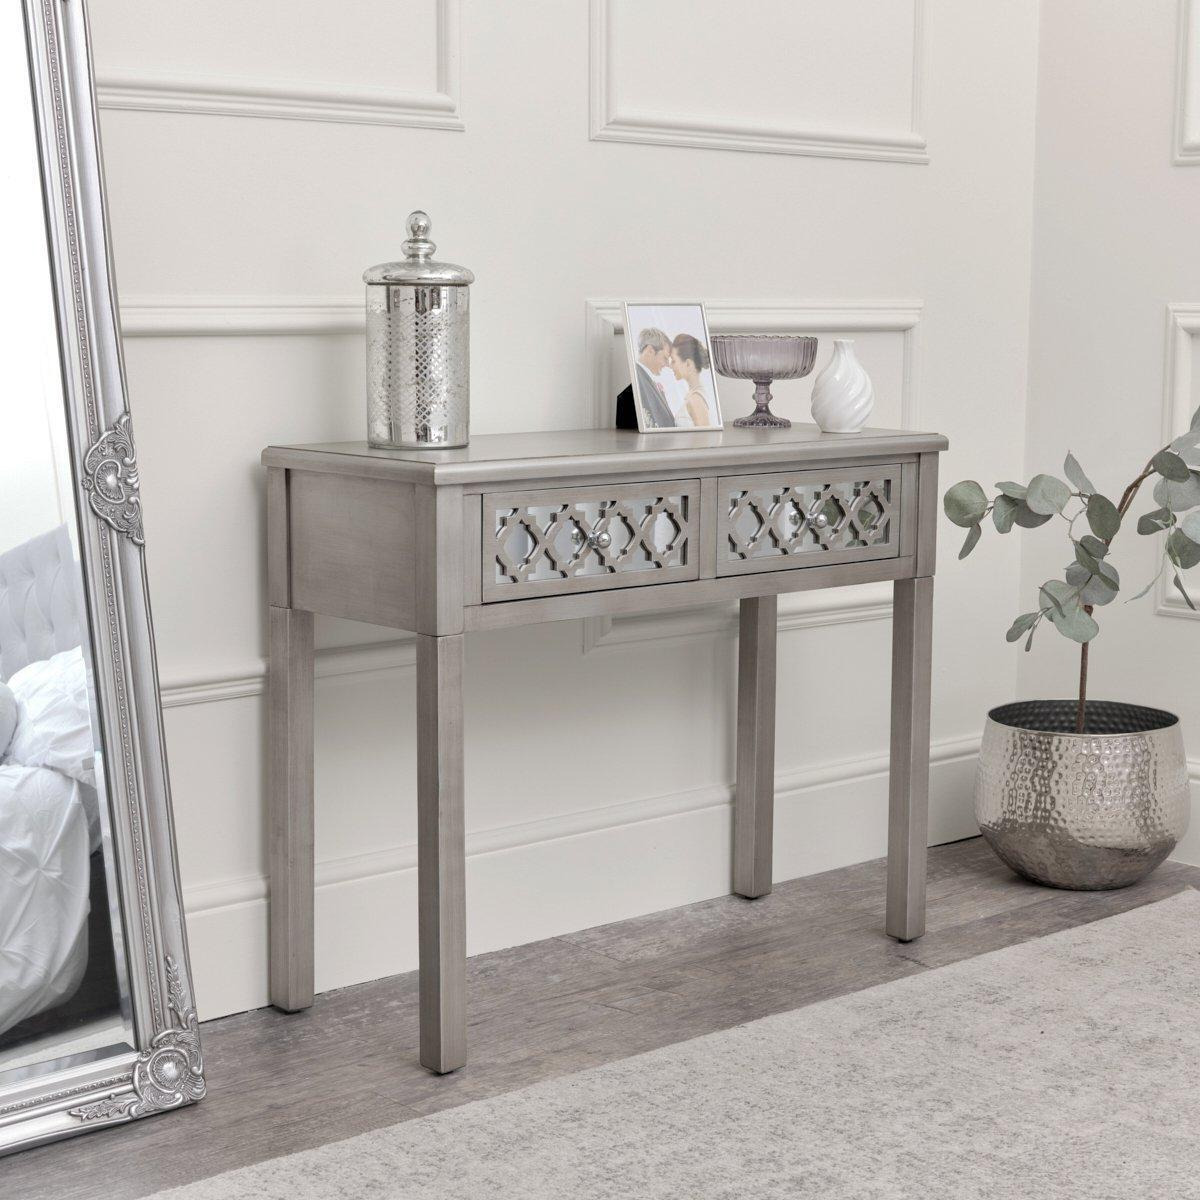 Silver Mirrored Console Table / Dressing Table - Sabrina Silver Range - image 1